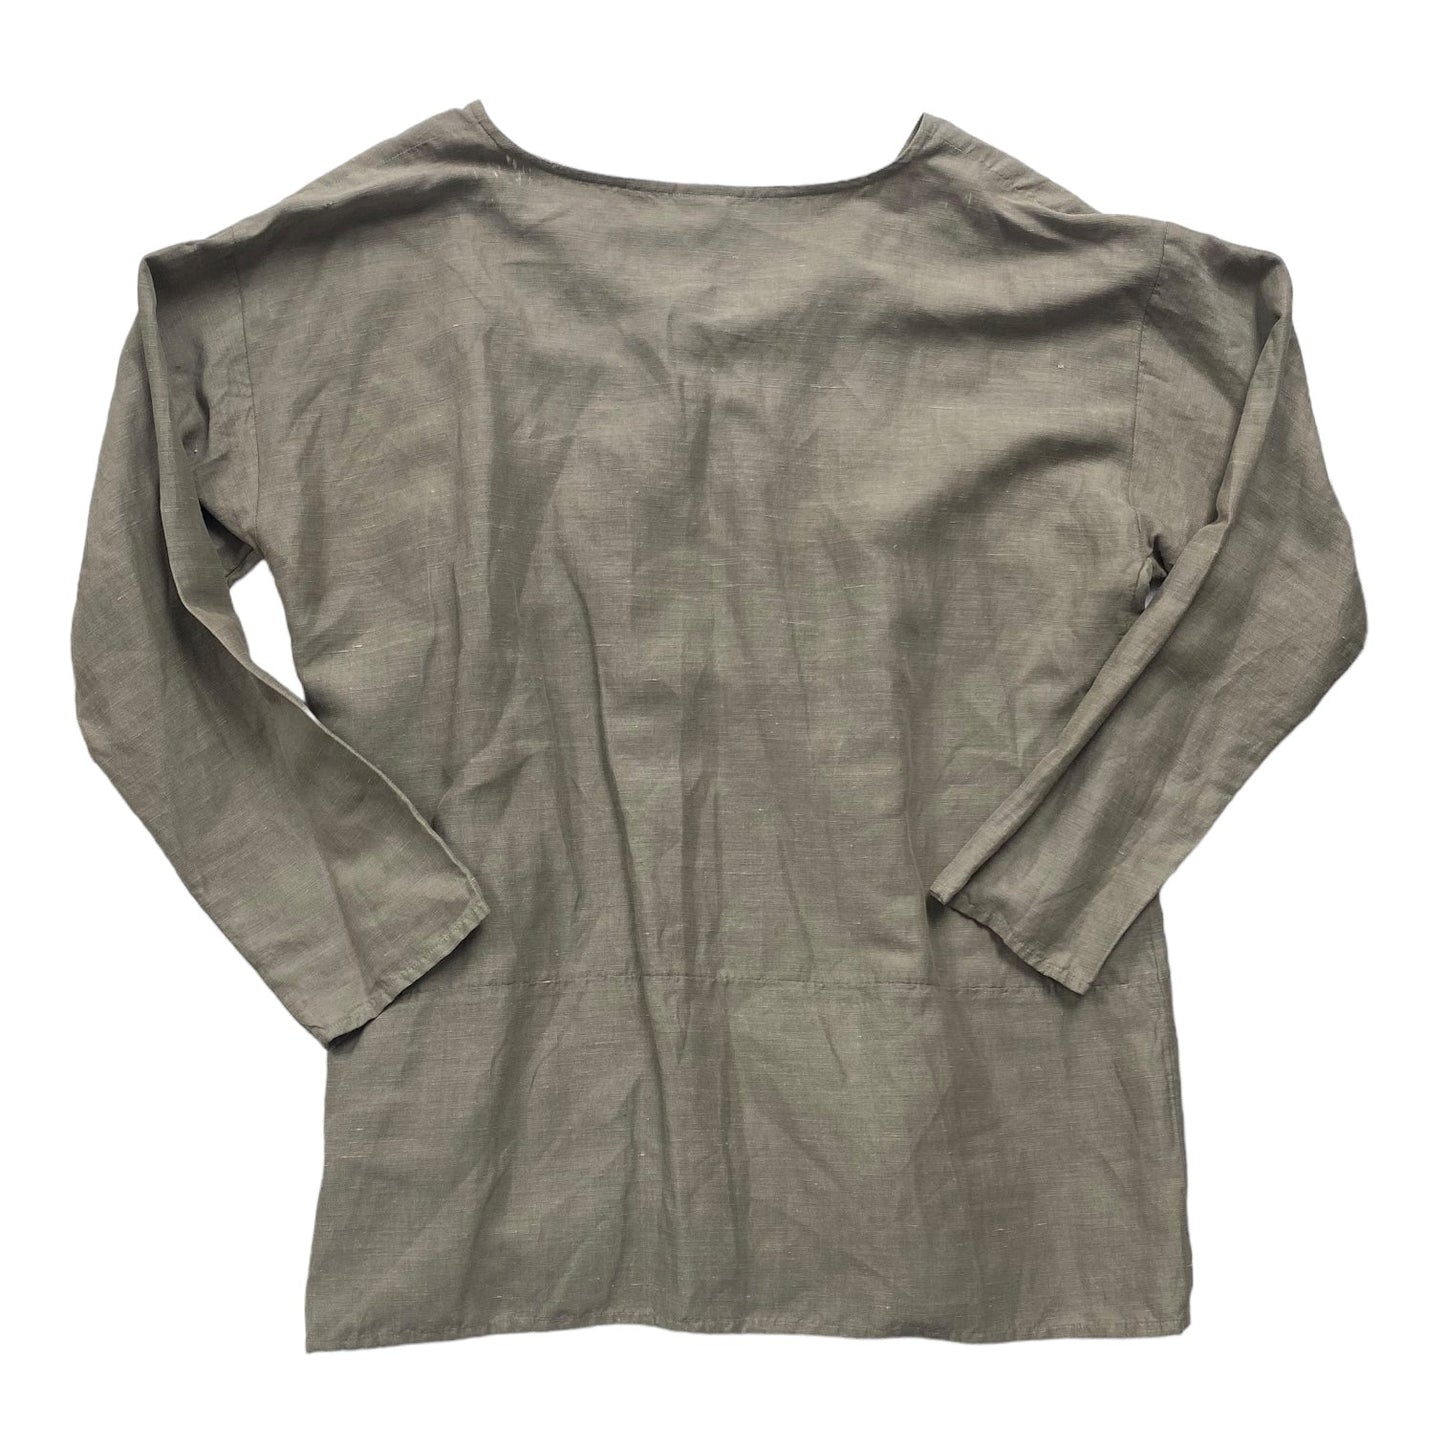 Taupe Top Long Sleeve Designer Eileen Fisher, Size L